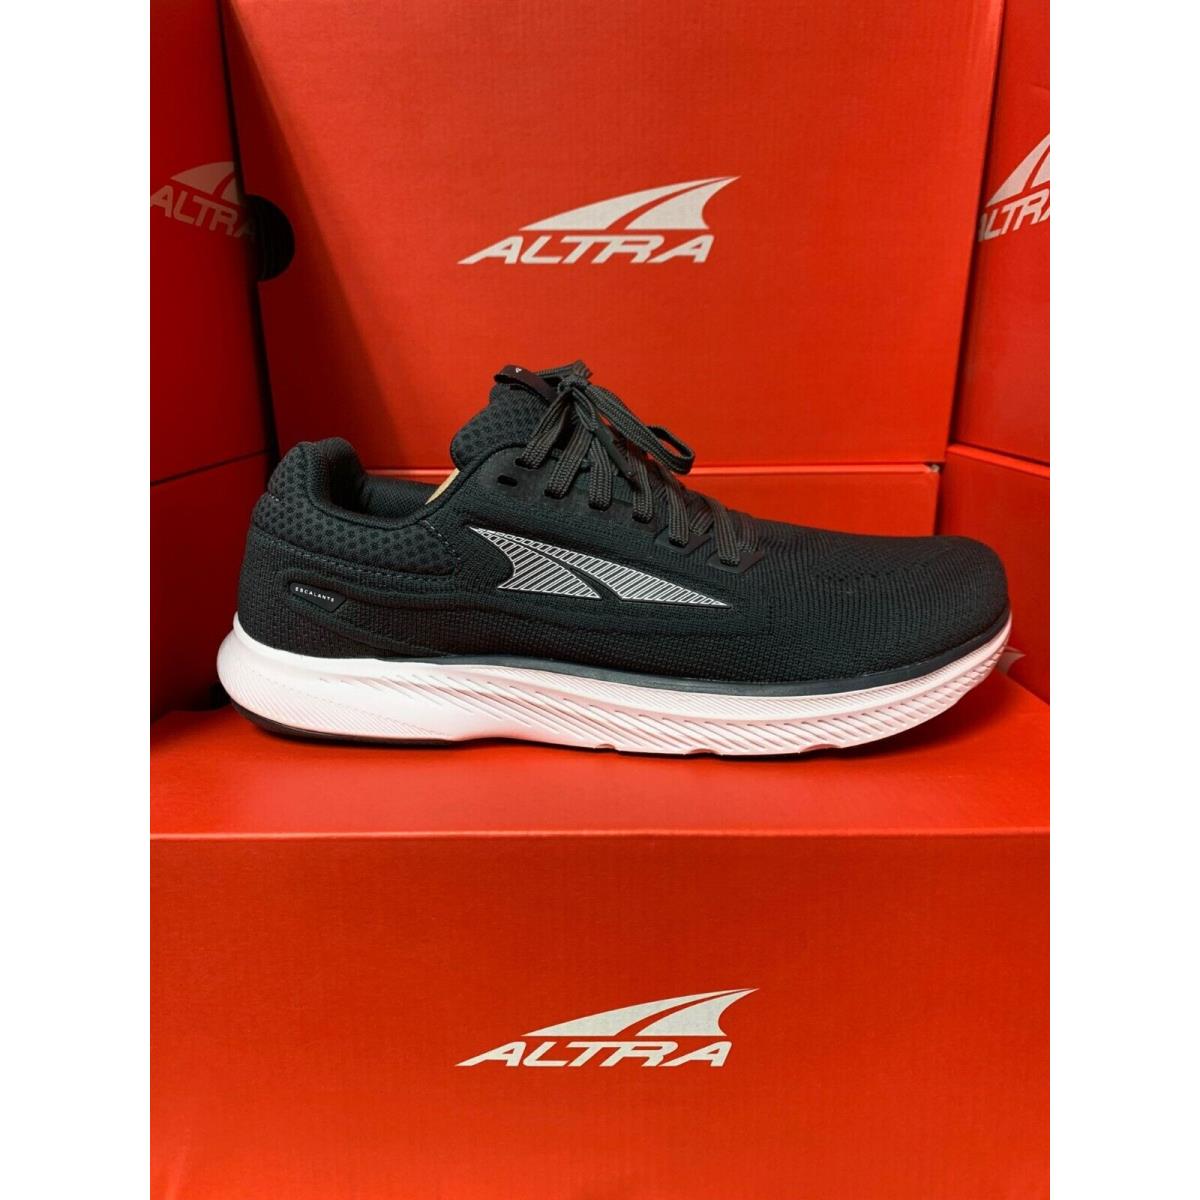 Altra Escalante 3 Black Running and Jogging Shoes For Women